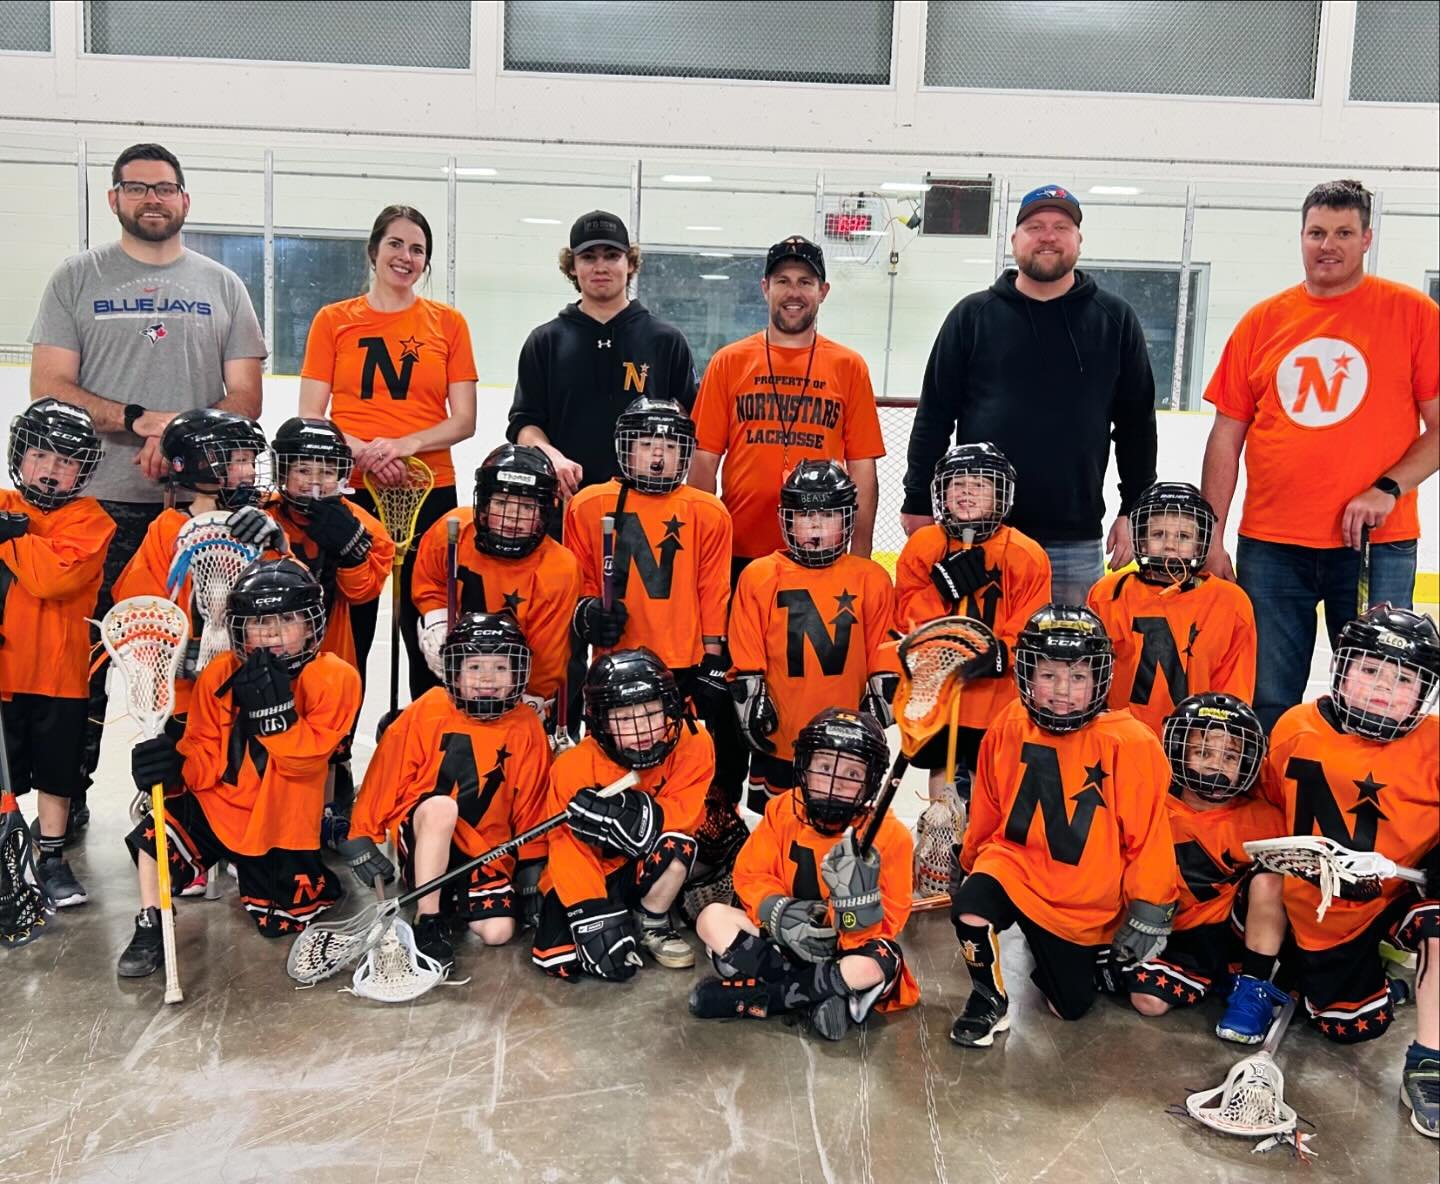 Our U7 Select had their first ever practice tonight together on the floor! These Northstars worked so hard and had some impressive lax skills out there 🥍⭐️